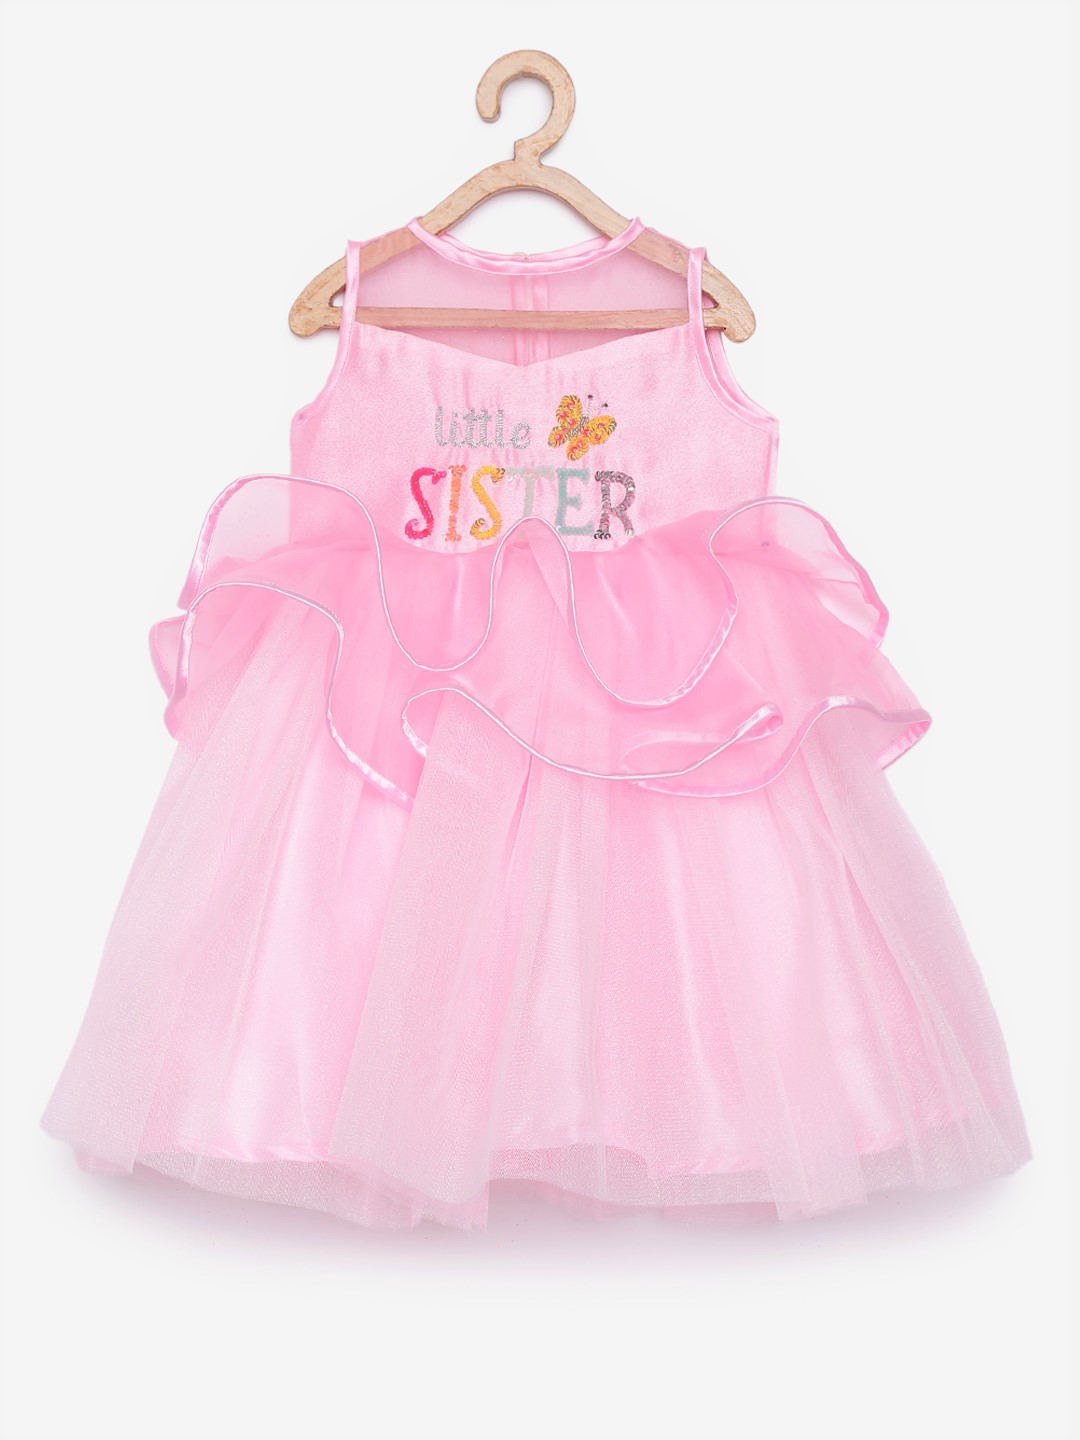 1 Little Sister Pink Ruffle Gown